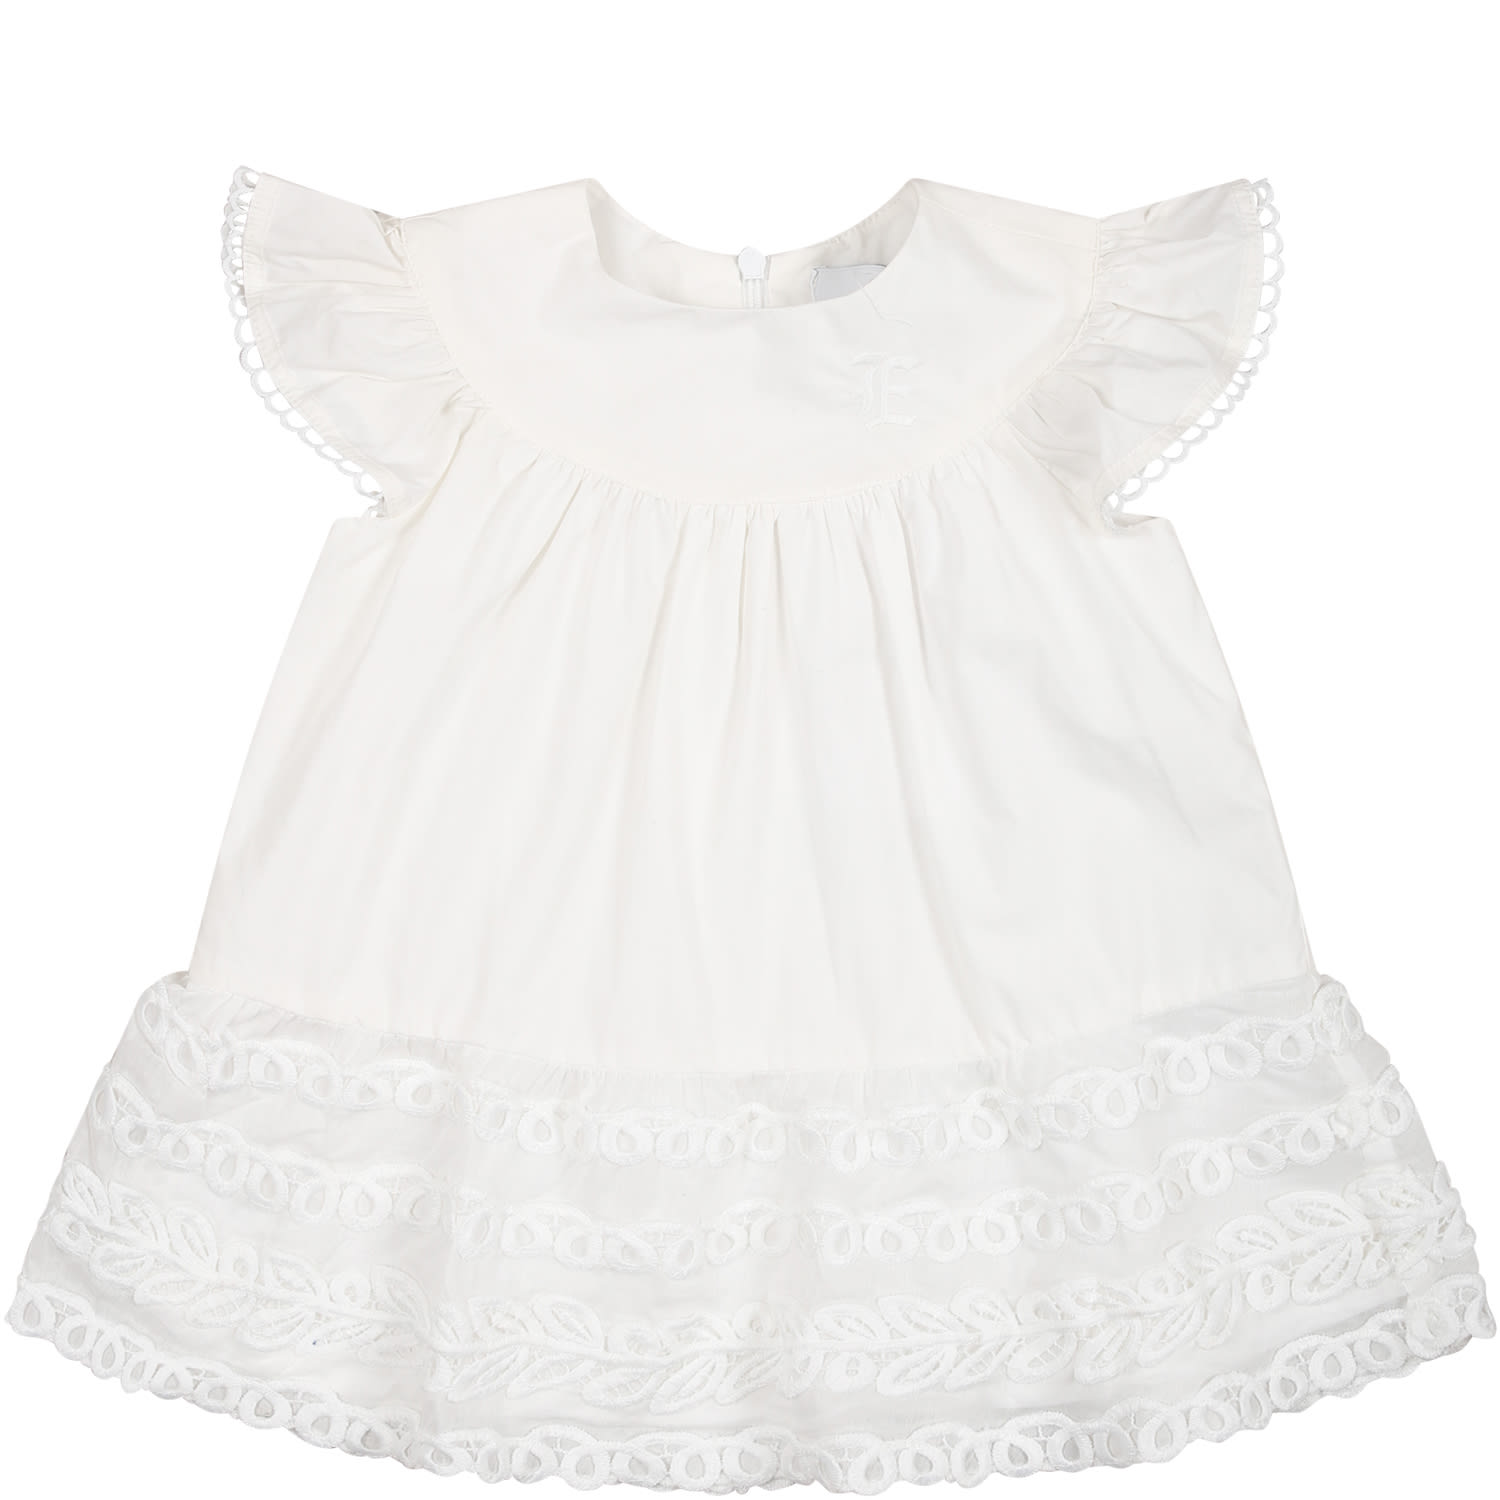 ERMANNO SCERVINO JUNIOR WHITE DRESS FOR BABY GIRL WITH EMBROIDERY AND LOGO